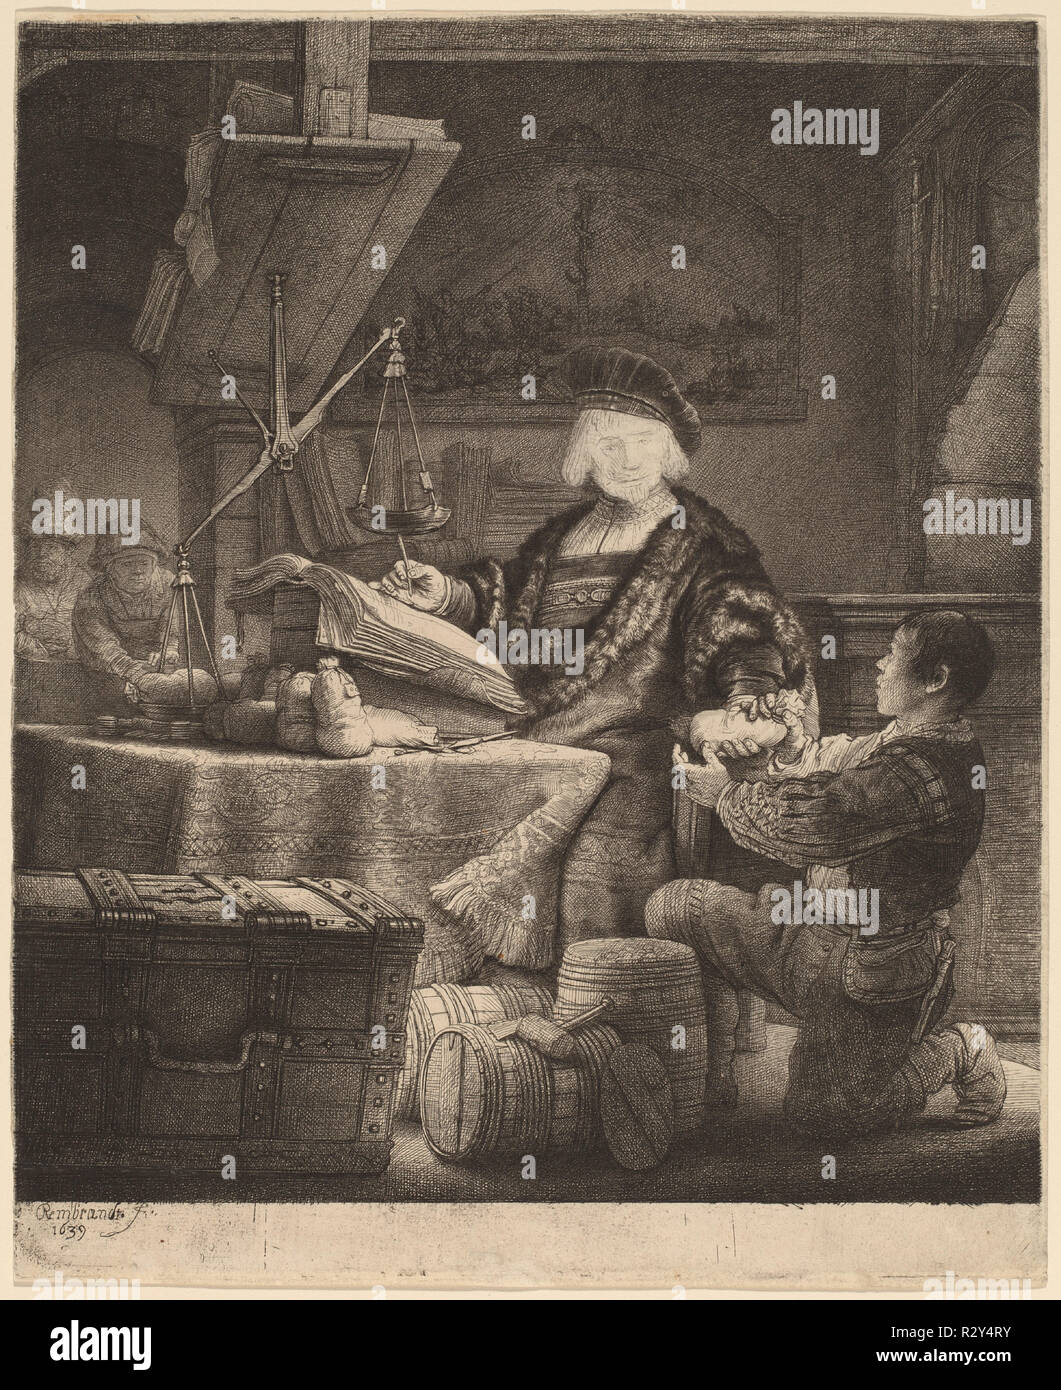 Jan Uytenbogaert, 'The Goldweigher'. Dimensions: plate: 24.6 x 20.2 cm (9 11/16 x 7 15/16 in.)  sheet: 24.8 x 20.4 cm (9 3/4 x 8 1/16 in.). Medium: etching on laid paper. Museum: National Gallery of Art, Washington DC. Author: REMBRANDT, HARMENSZOON VAN RIJN. REMBRANDT HARMENSZOON VAN RIJN. Rembrandt van Rhijn. Stock Photo